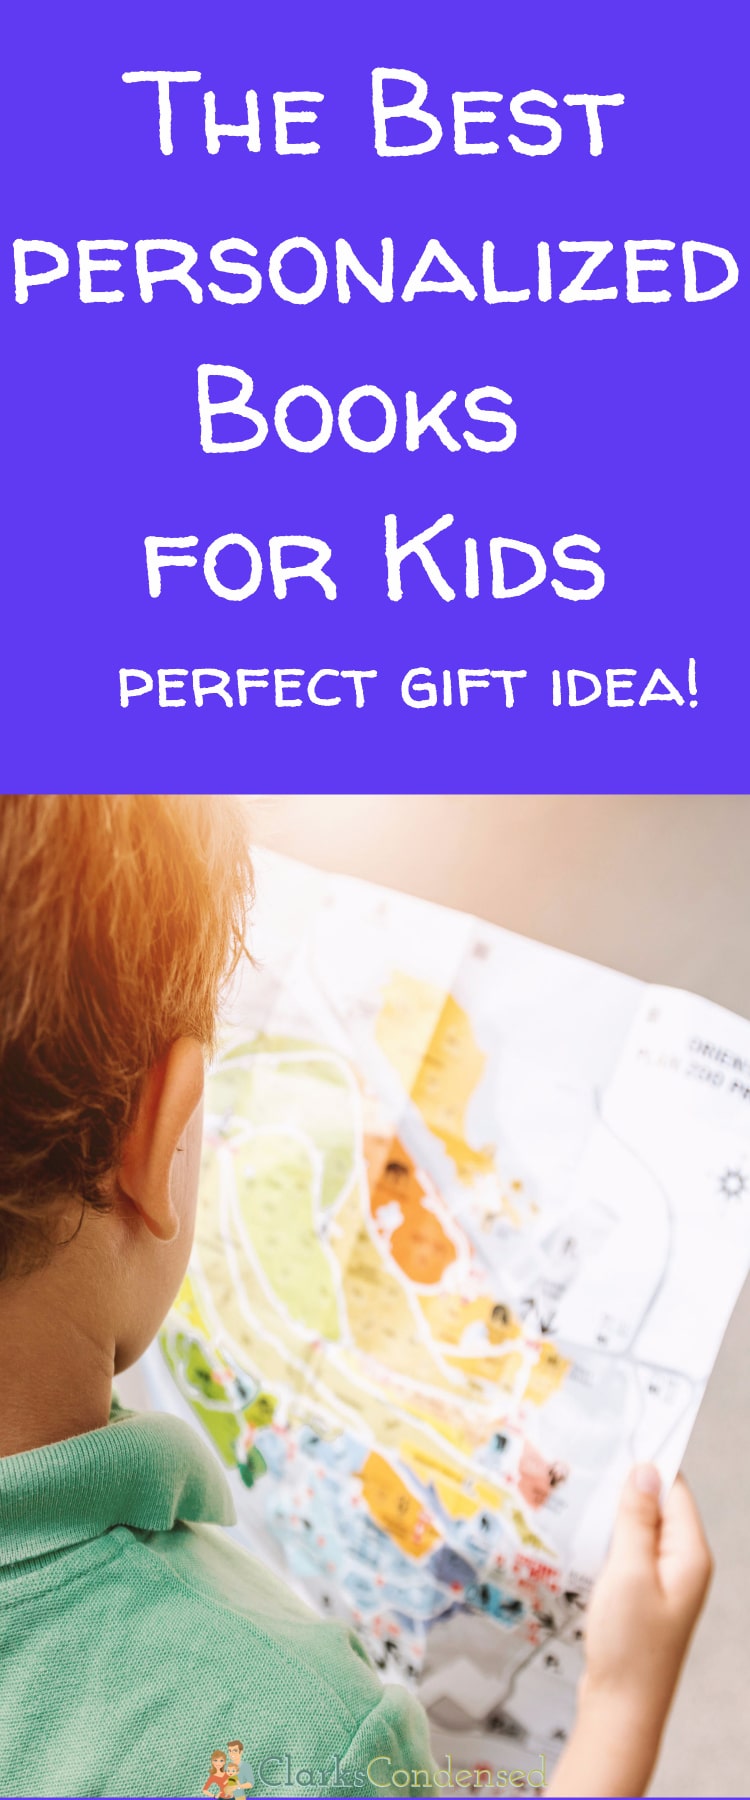 The best personalized books for kids / christmas / gift ideas